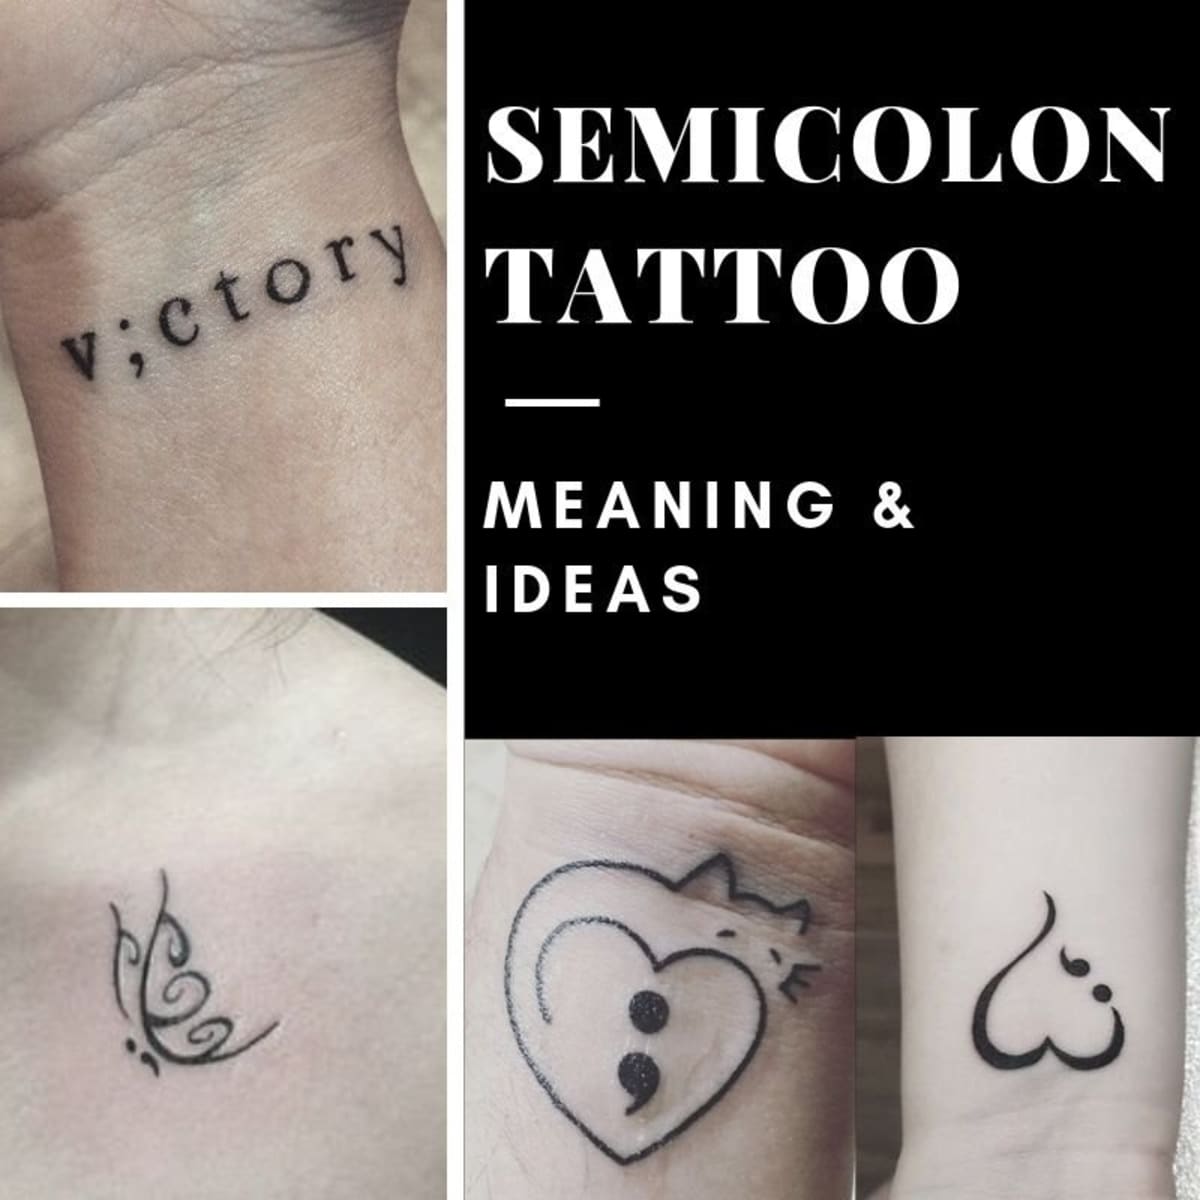 What is the significance of semicolon tattoos? - Quora